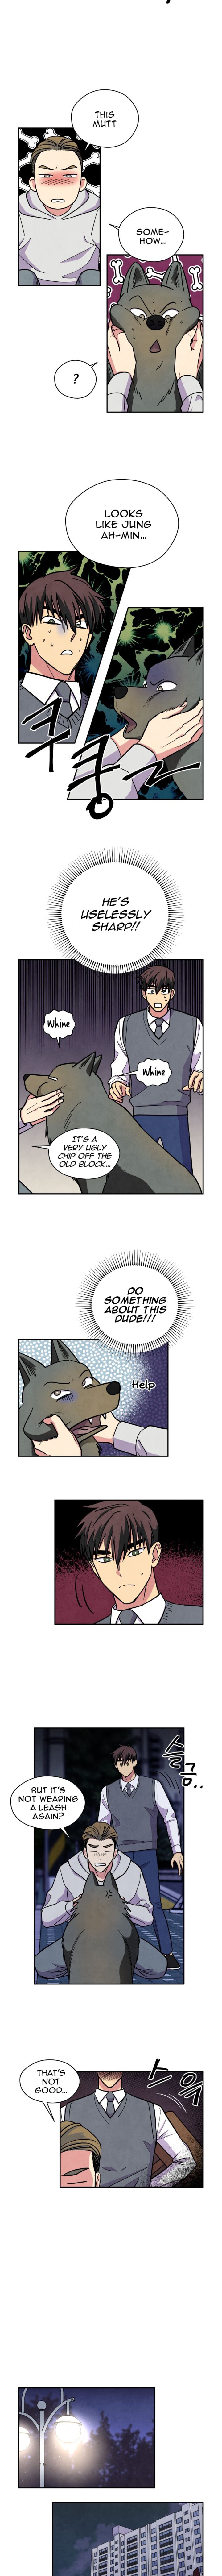 The Little Red Riding Hood Chapter 38 Page 4